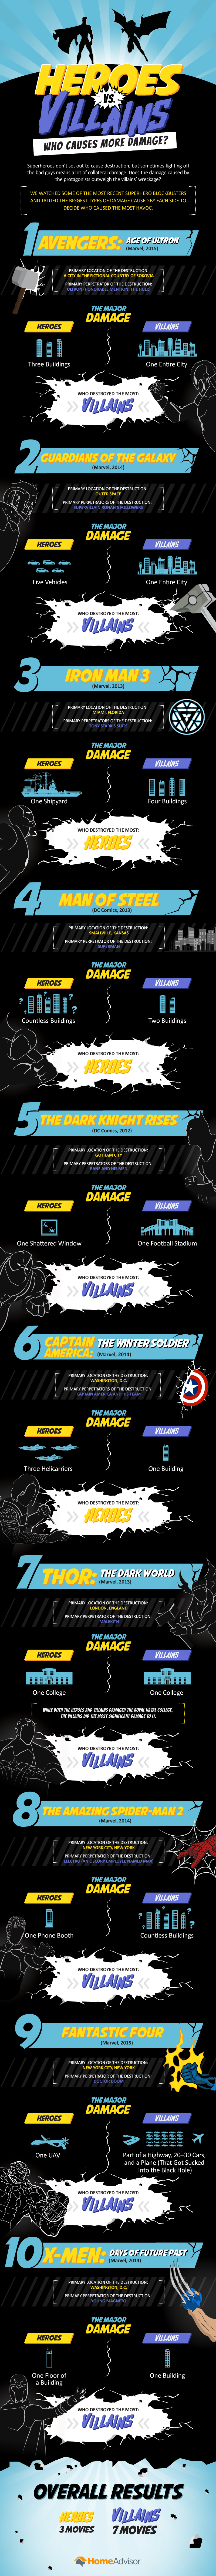 Heroes vs. Villains: Who Causes More Damage?